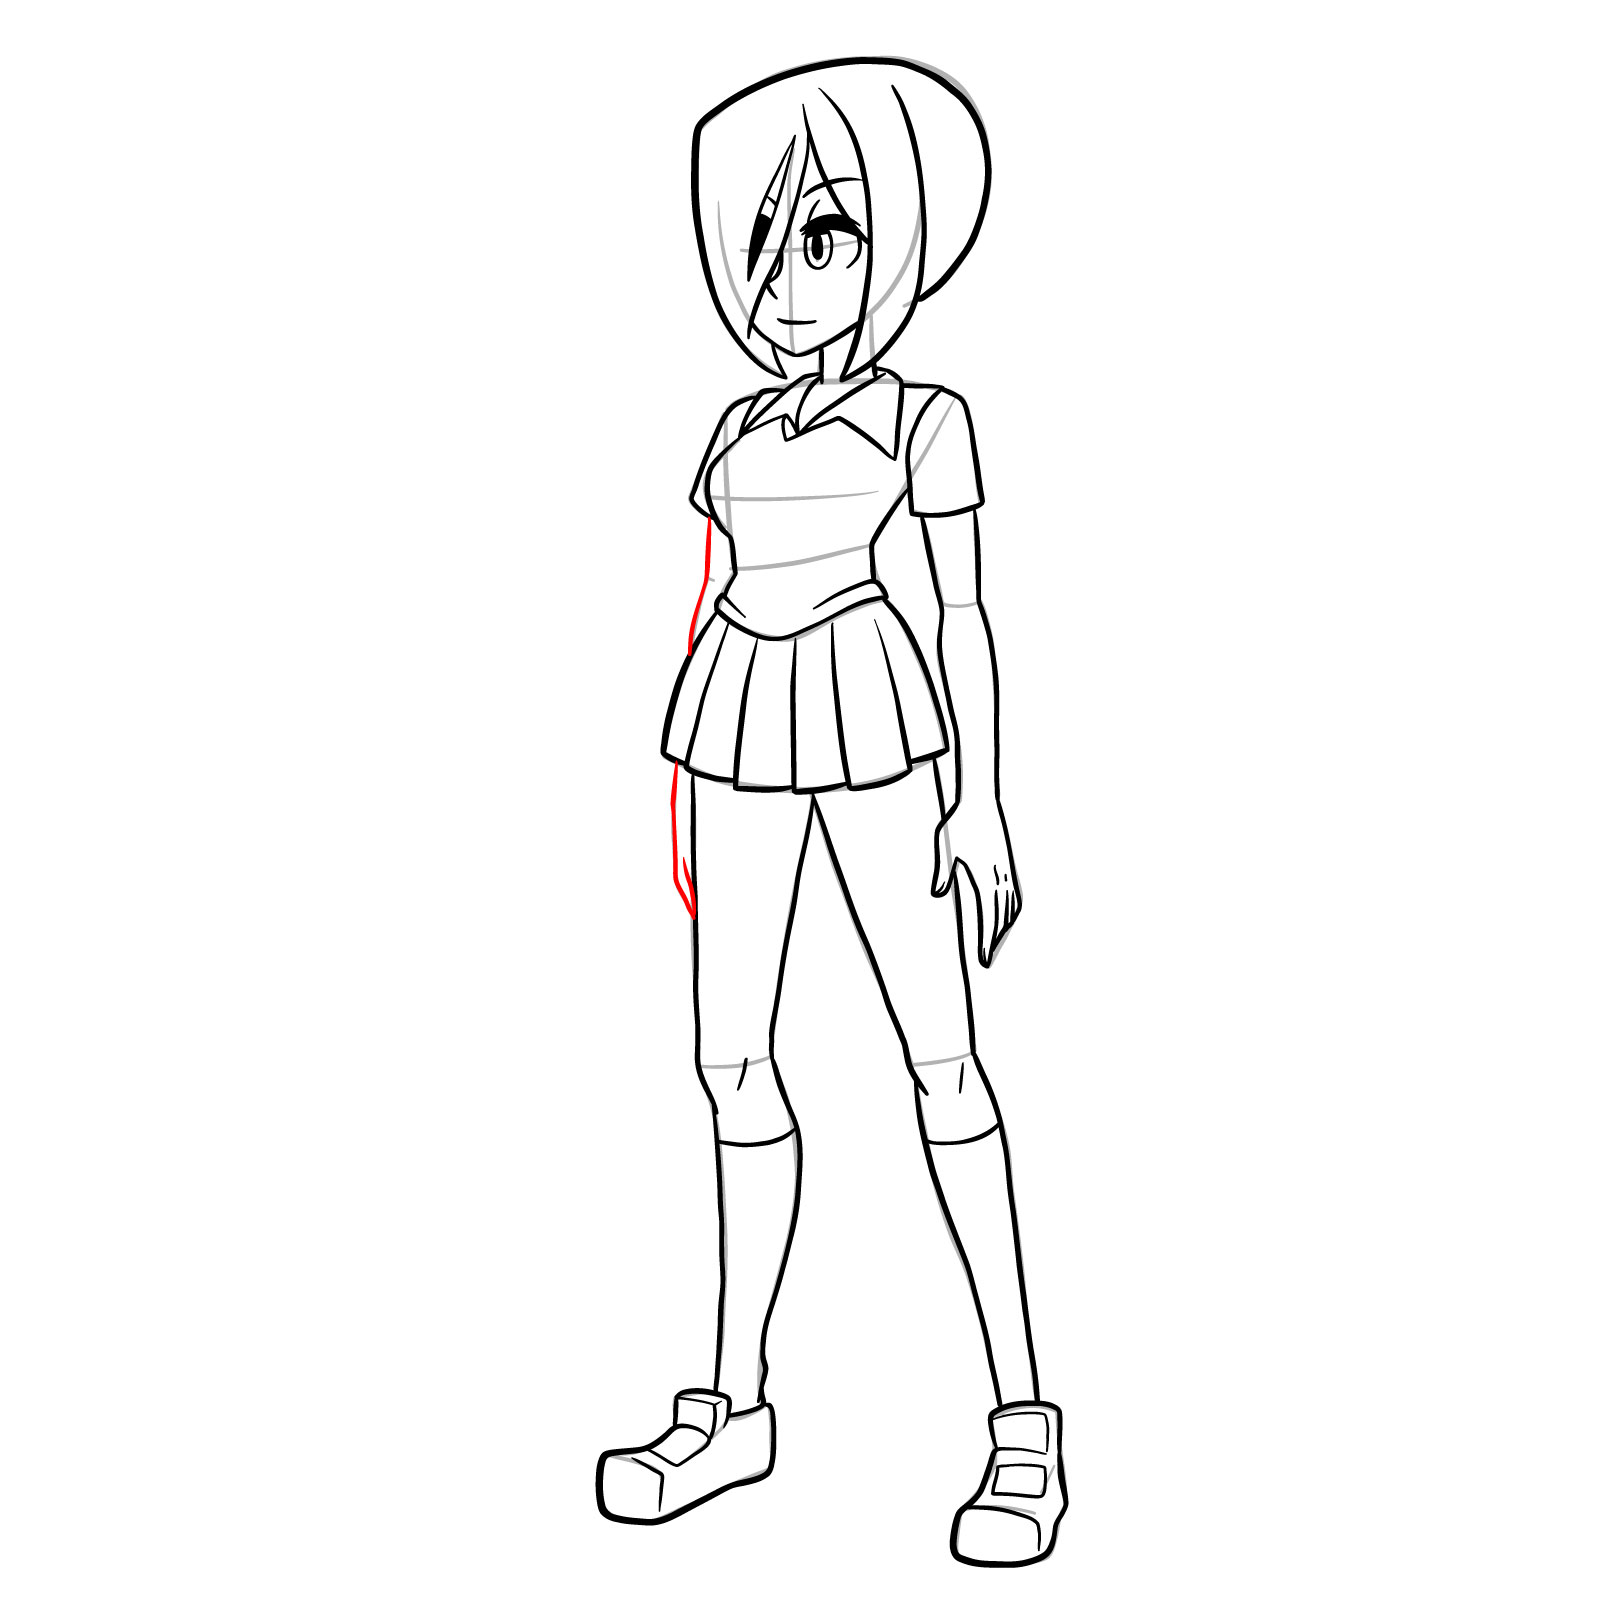 How to draw Teen Parasoul from Skullgirls - step 23